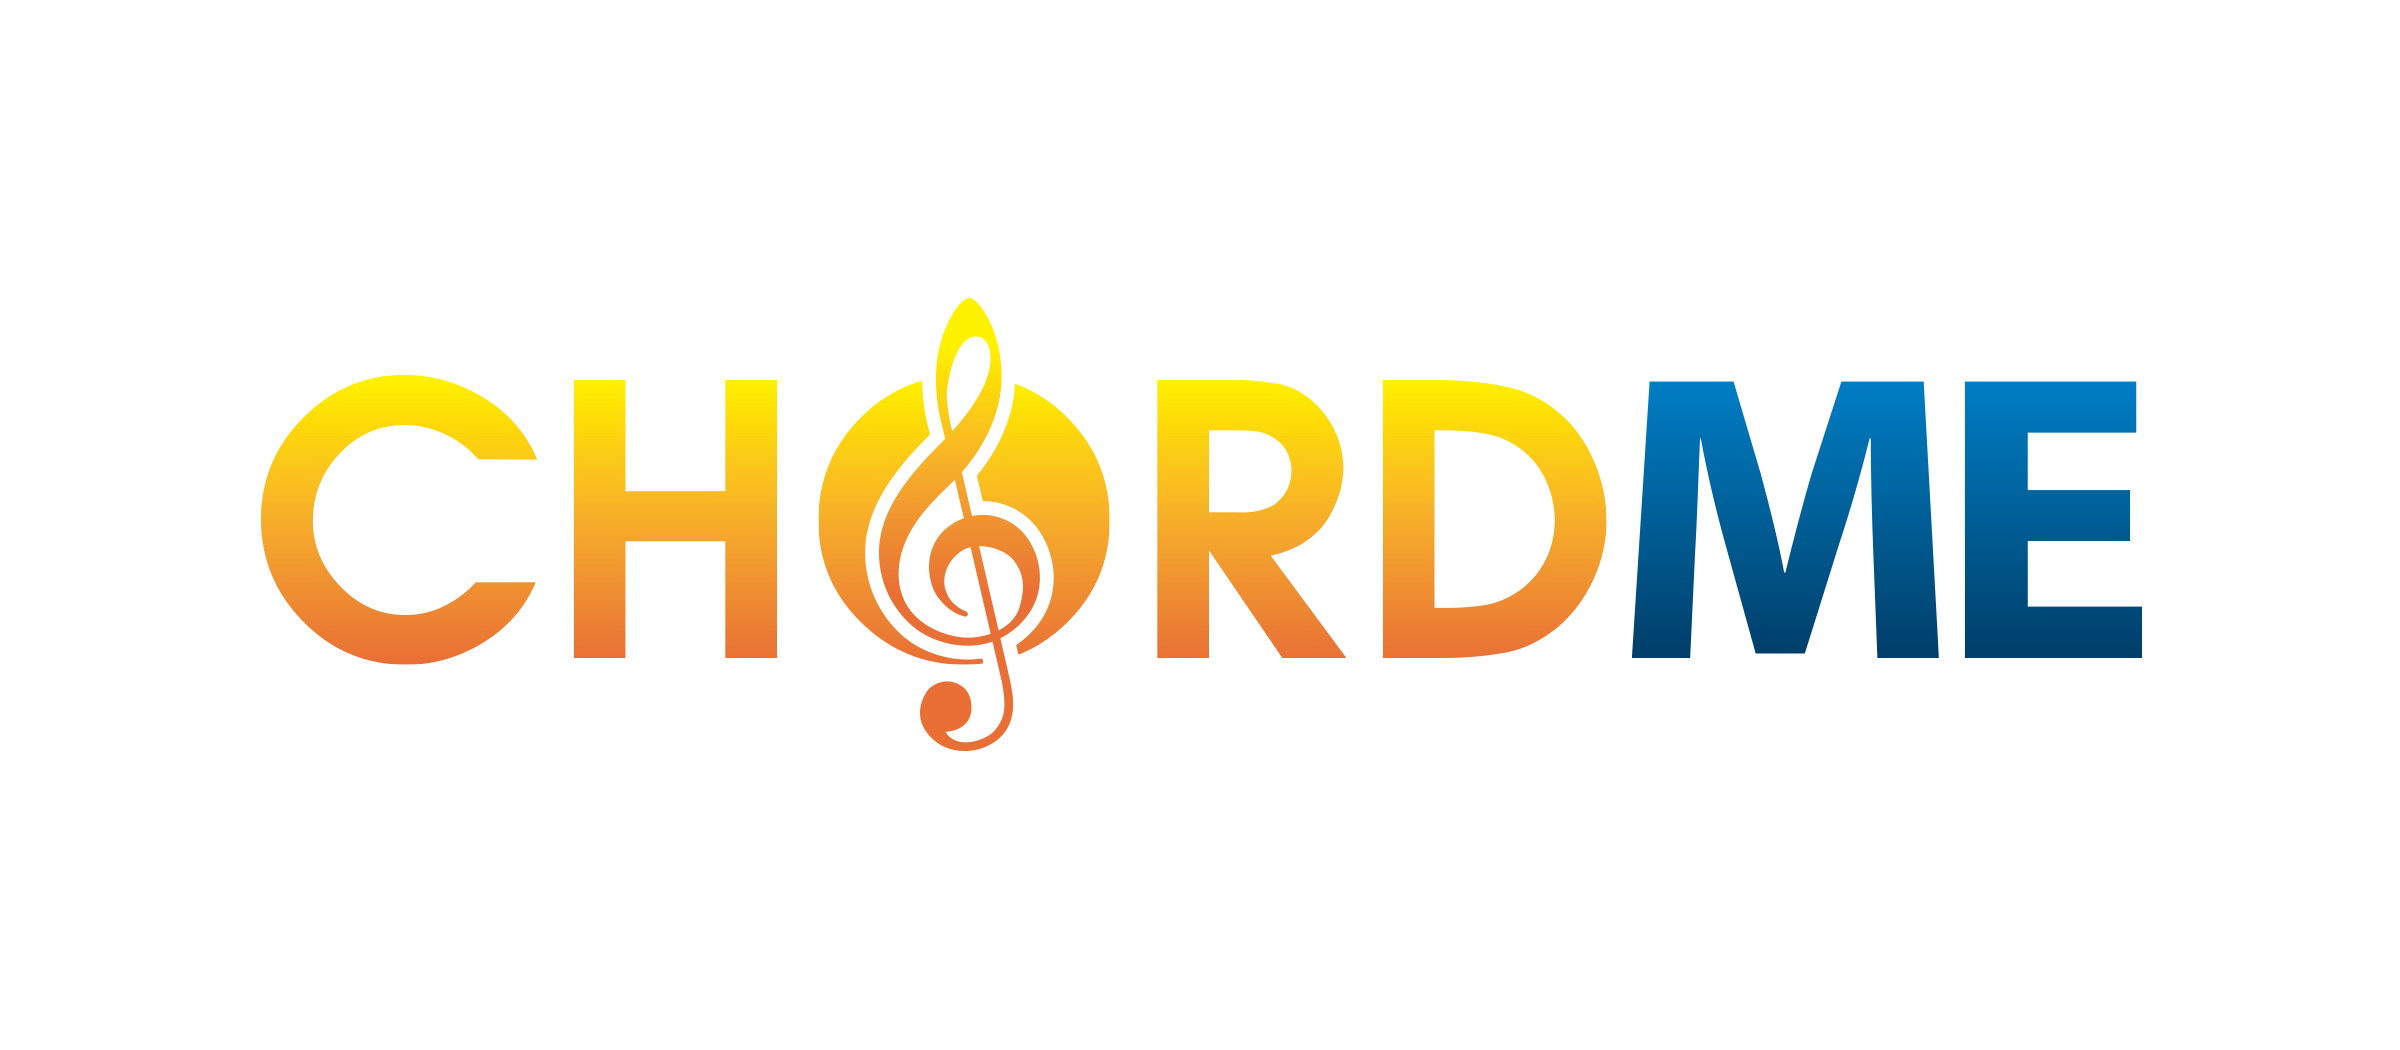 Chord Me will provide a great deal of help to pianists